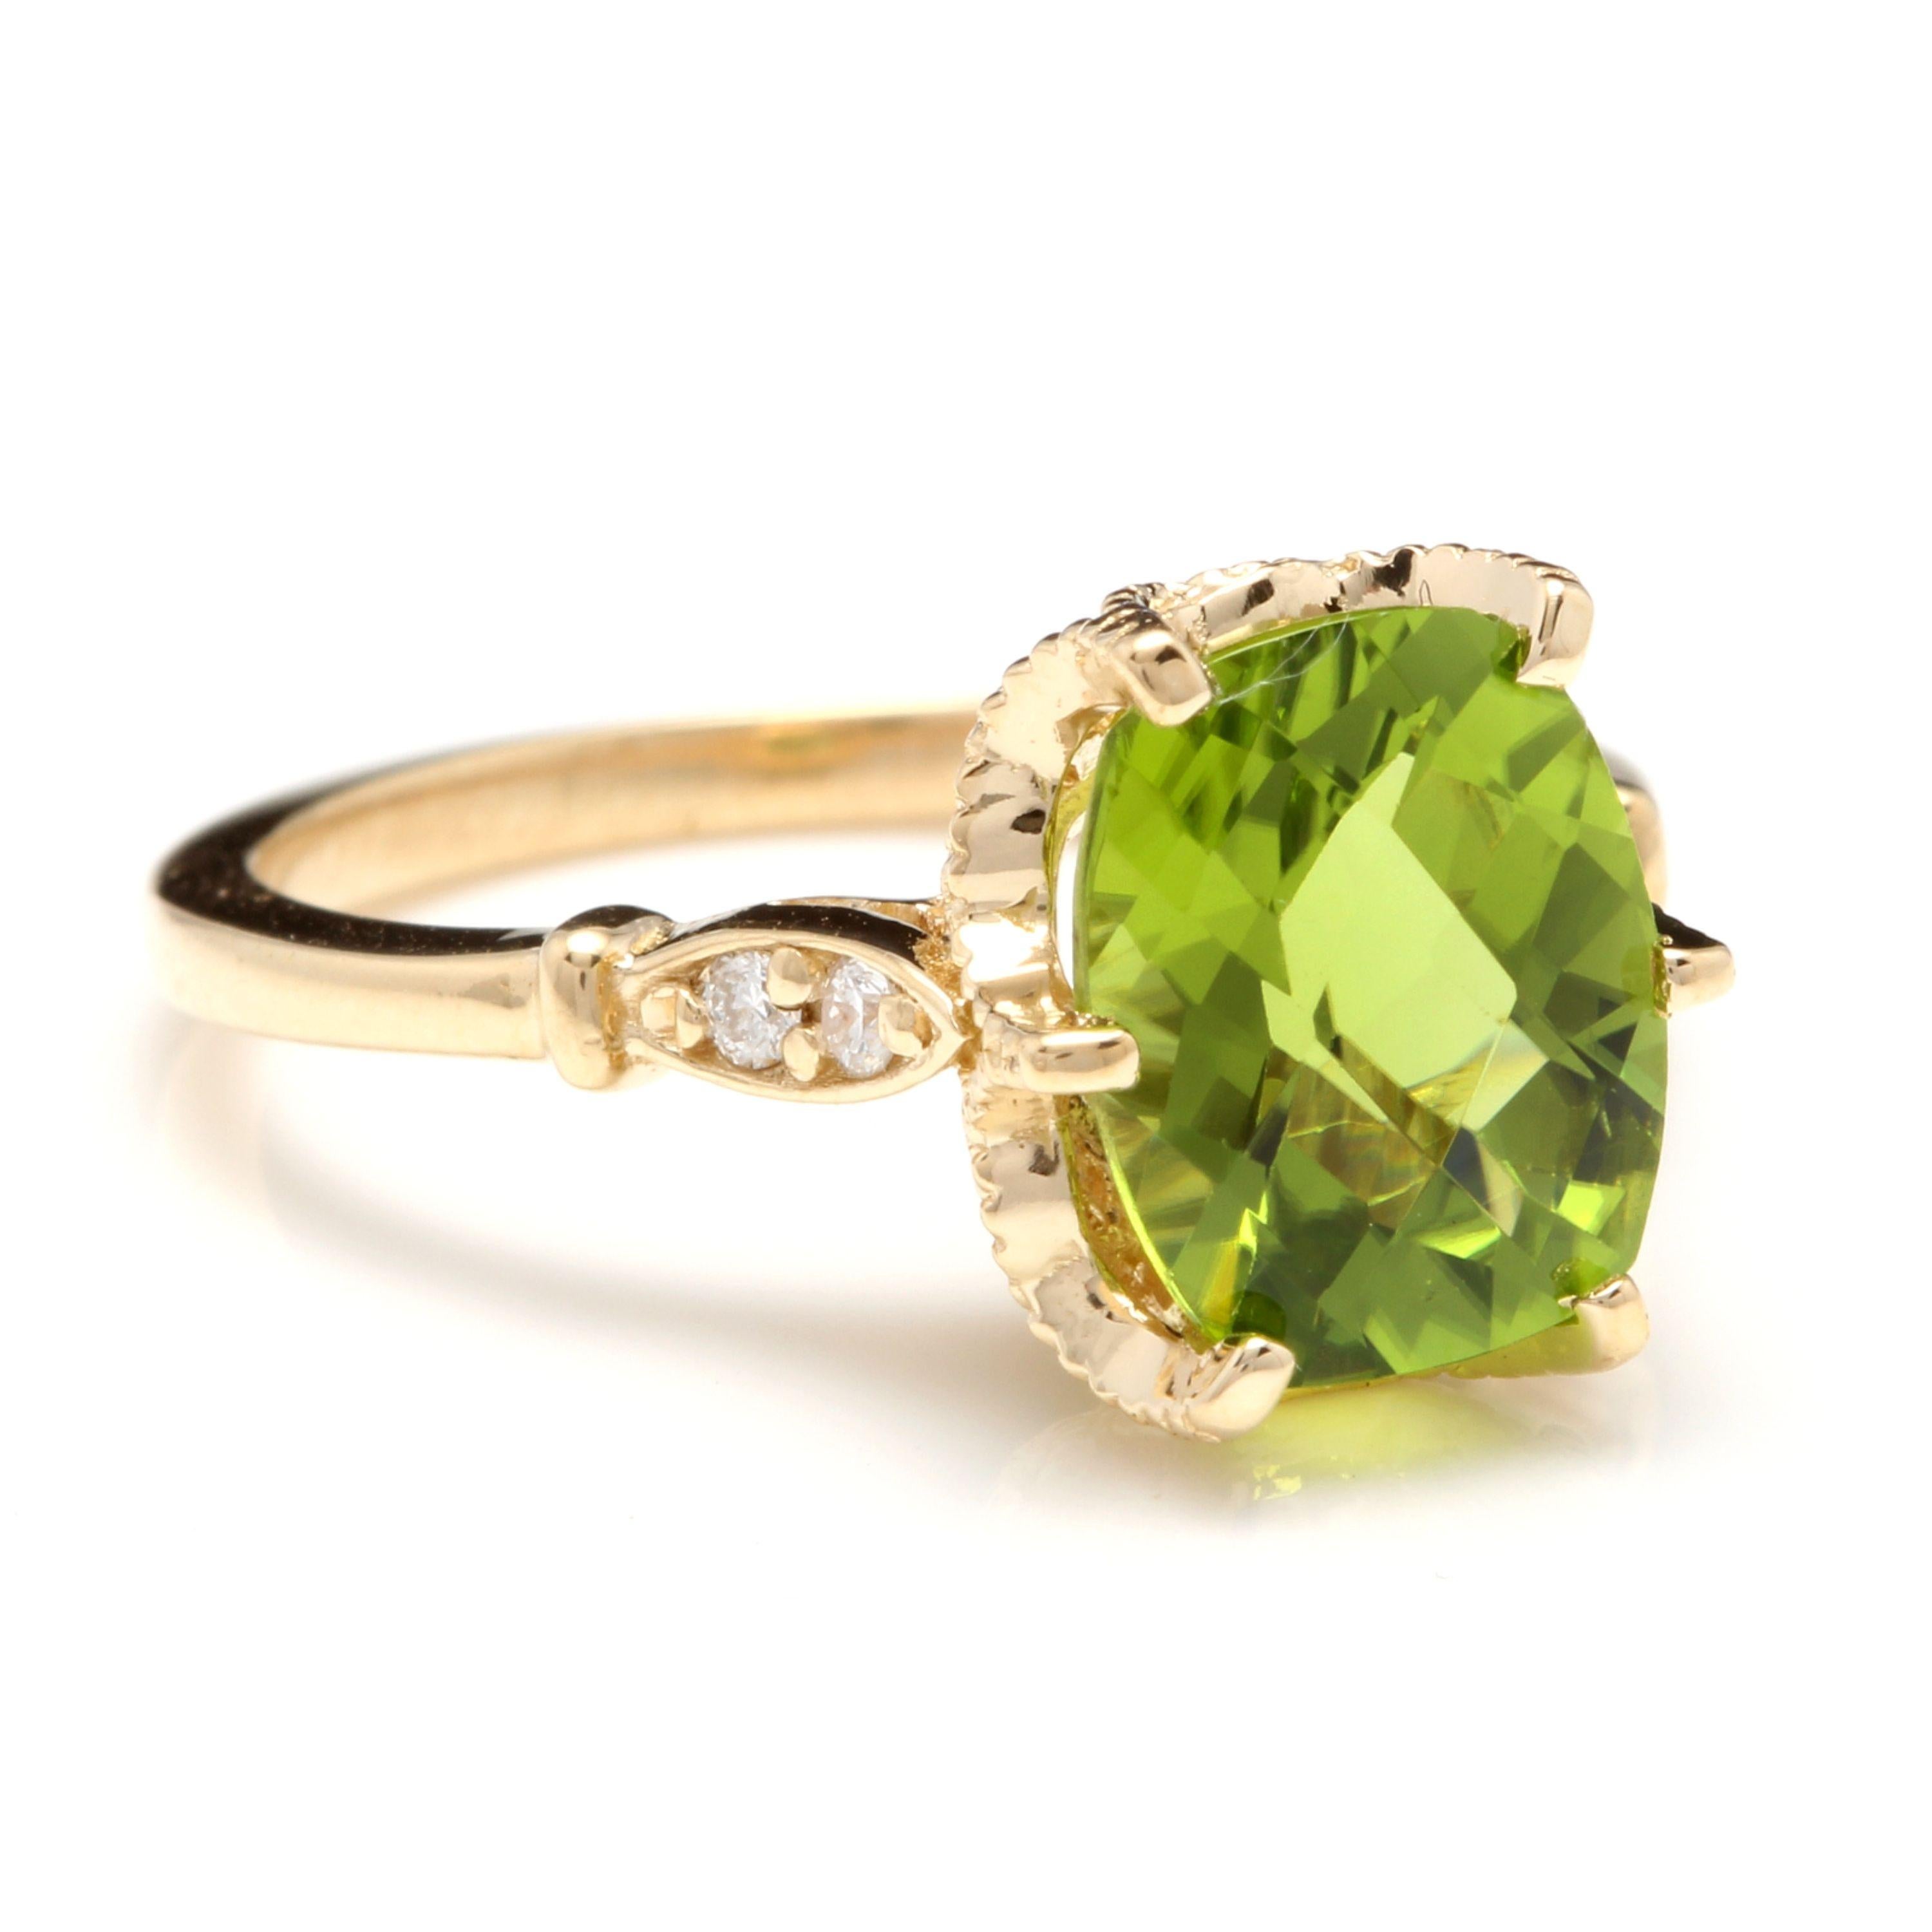 3.00 Carats Impressive Natural Peridot and Diamond 14K Yellow Gold Ring

Total Natural Peridot Weight is: Approx. 2.92 Carats

Peridot Measures: Approx. 10.00 x 8.00mm

Natural Round Diamonds Weight: Approx. 0.08 Carats (color G-H / Clarity